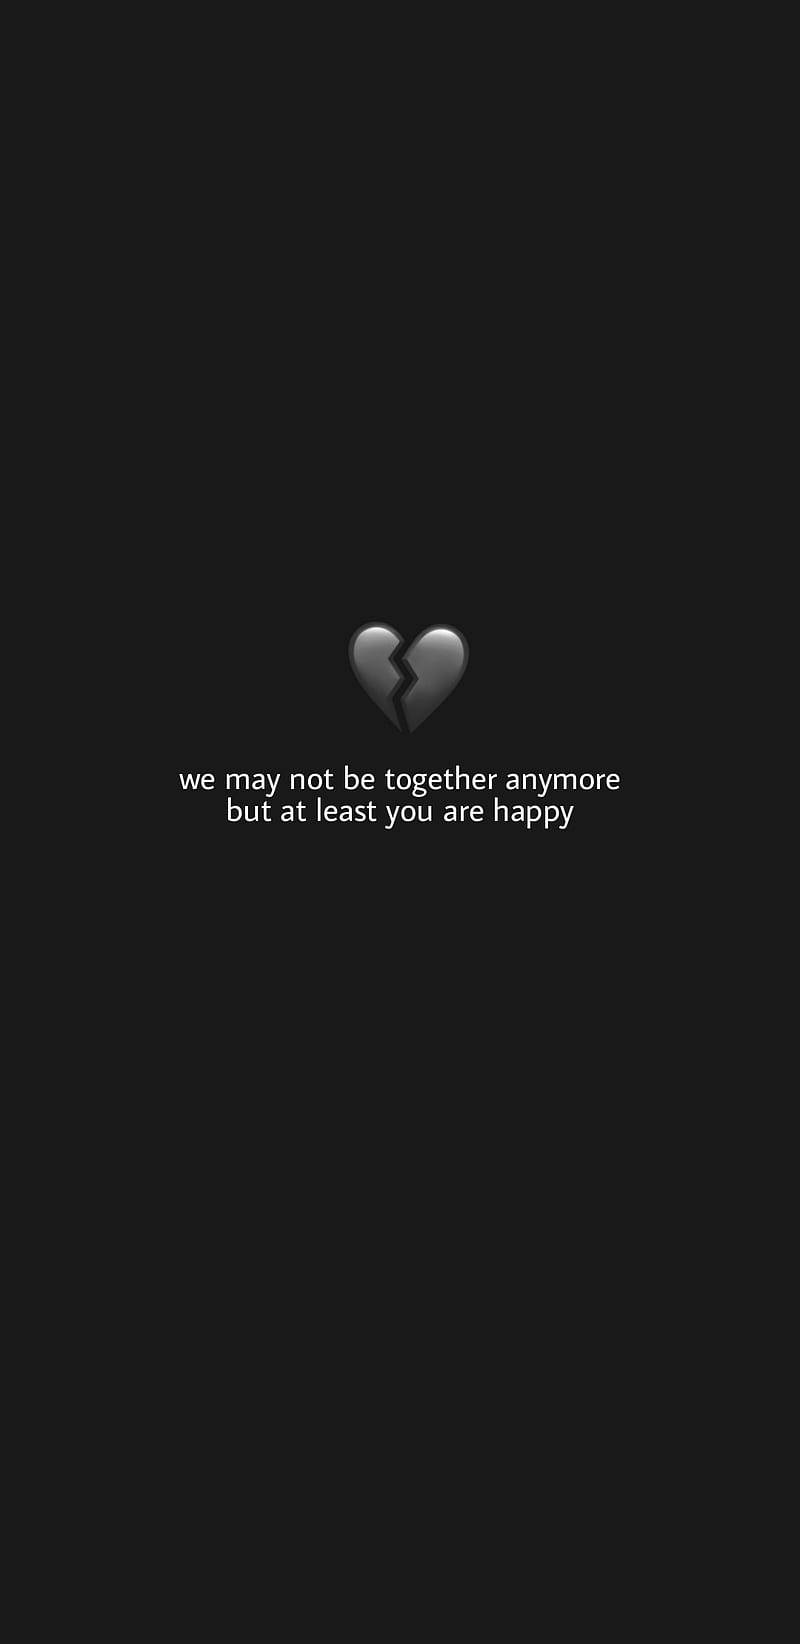 Single Quotes And Heartbrokeness Background